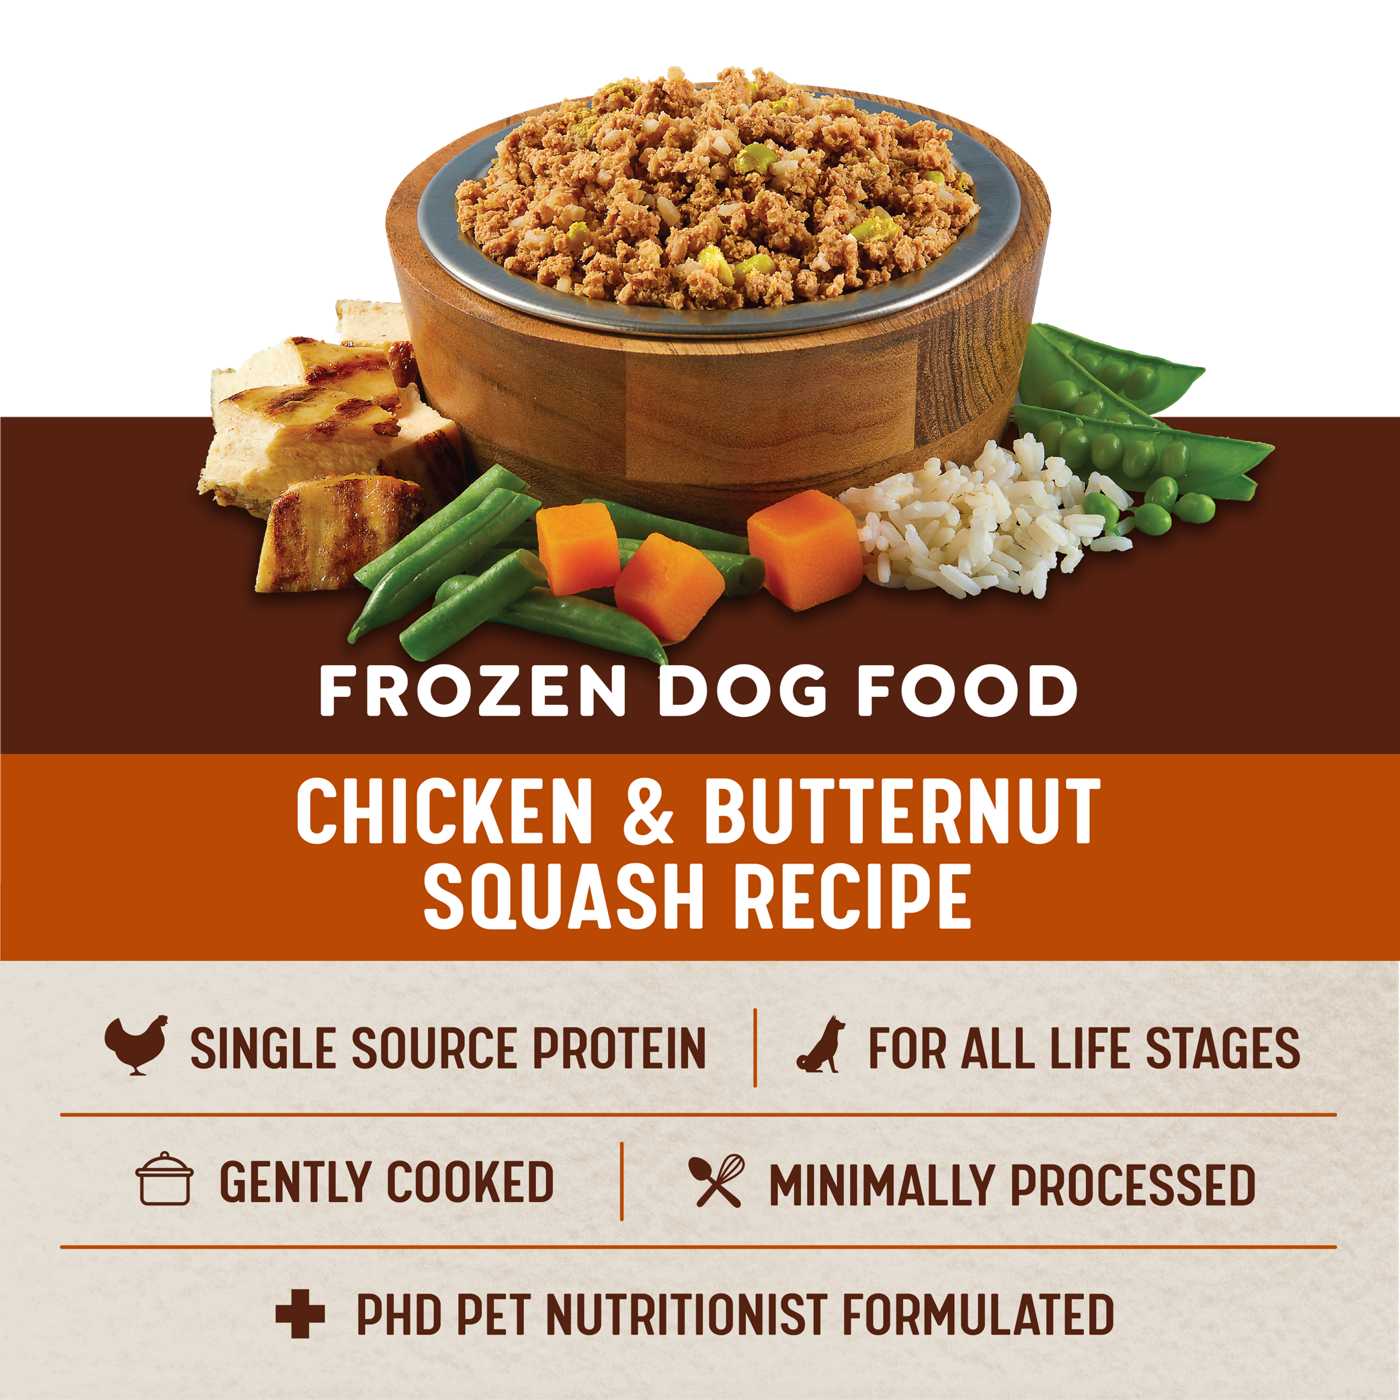 Heritage Ranch by H-E-B Frozen Dog Food - Chicken & Butternut Squash; image 7 of 7